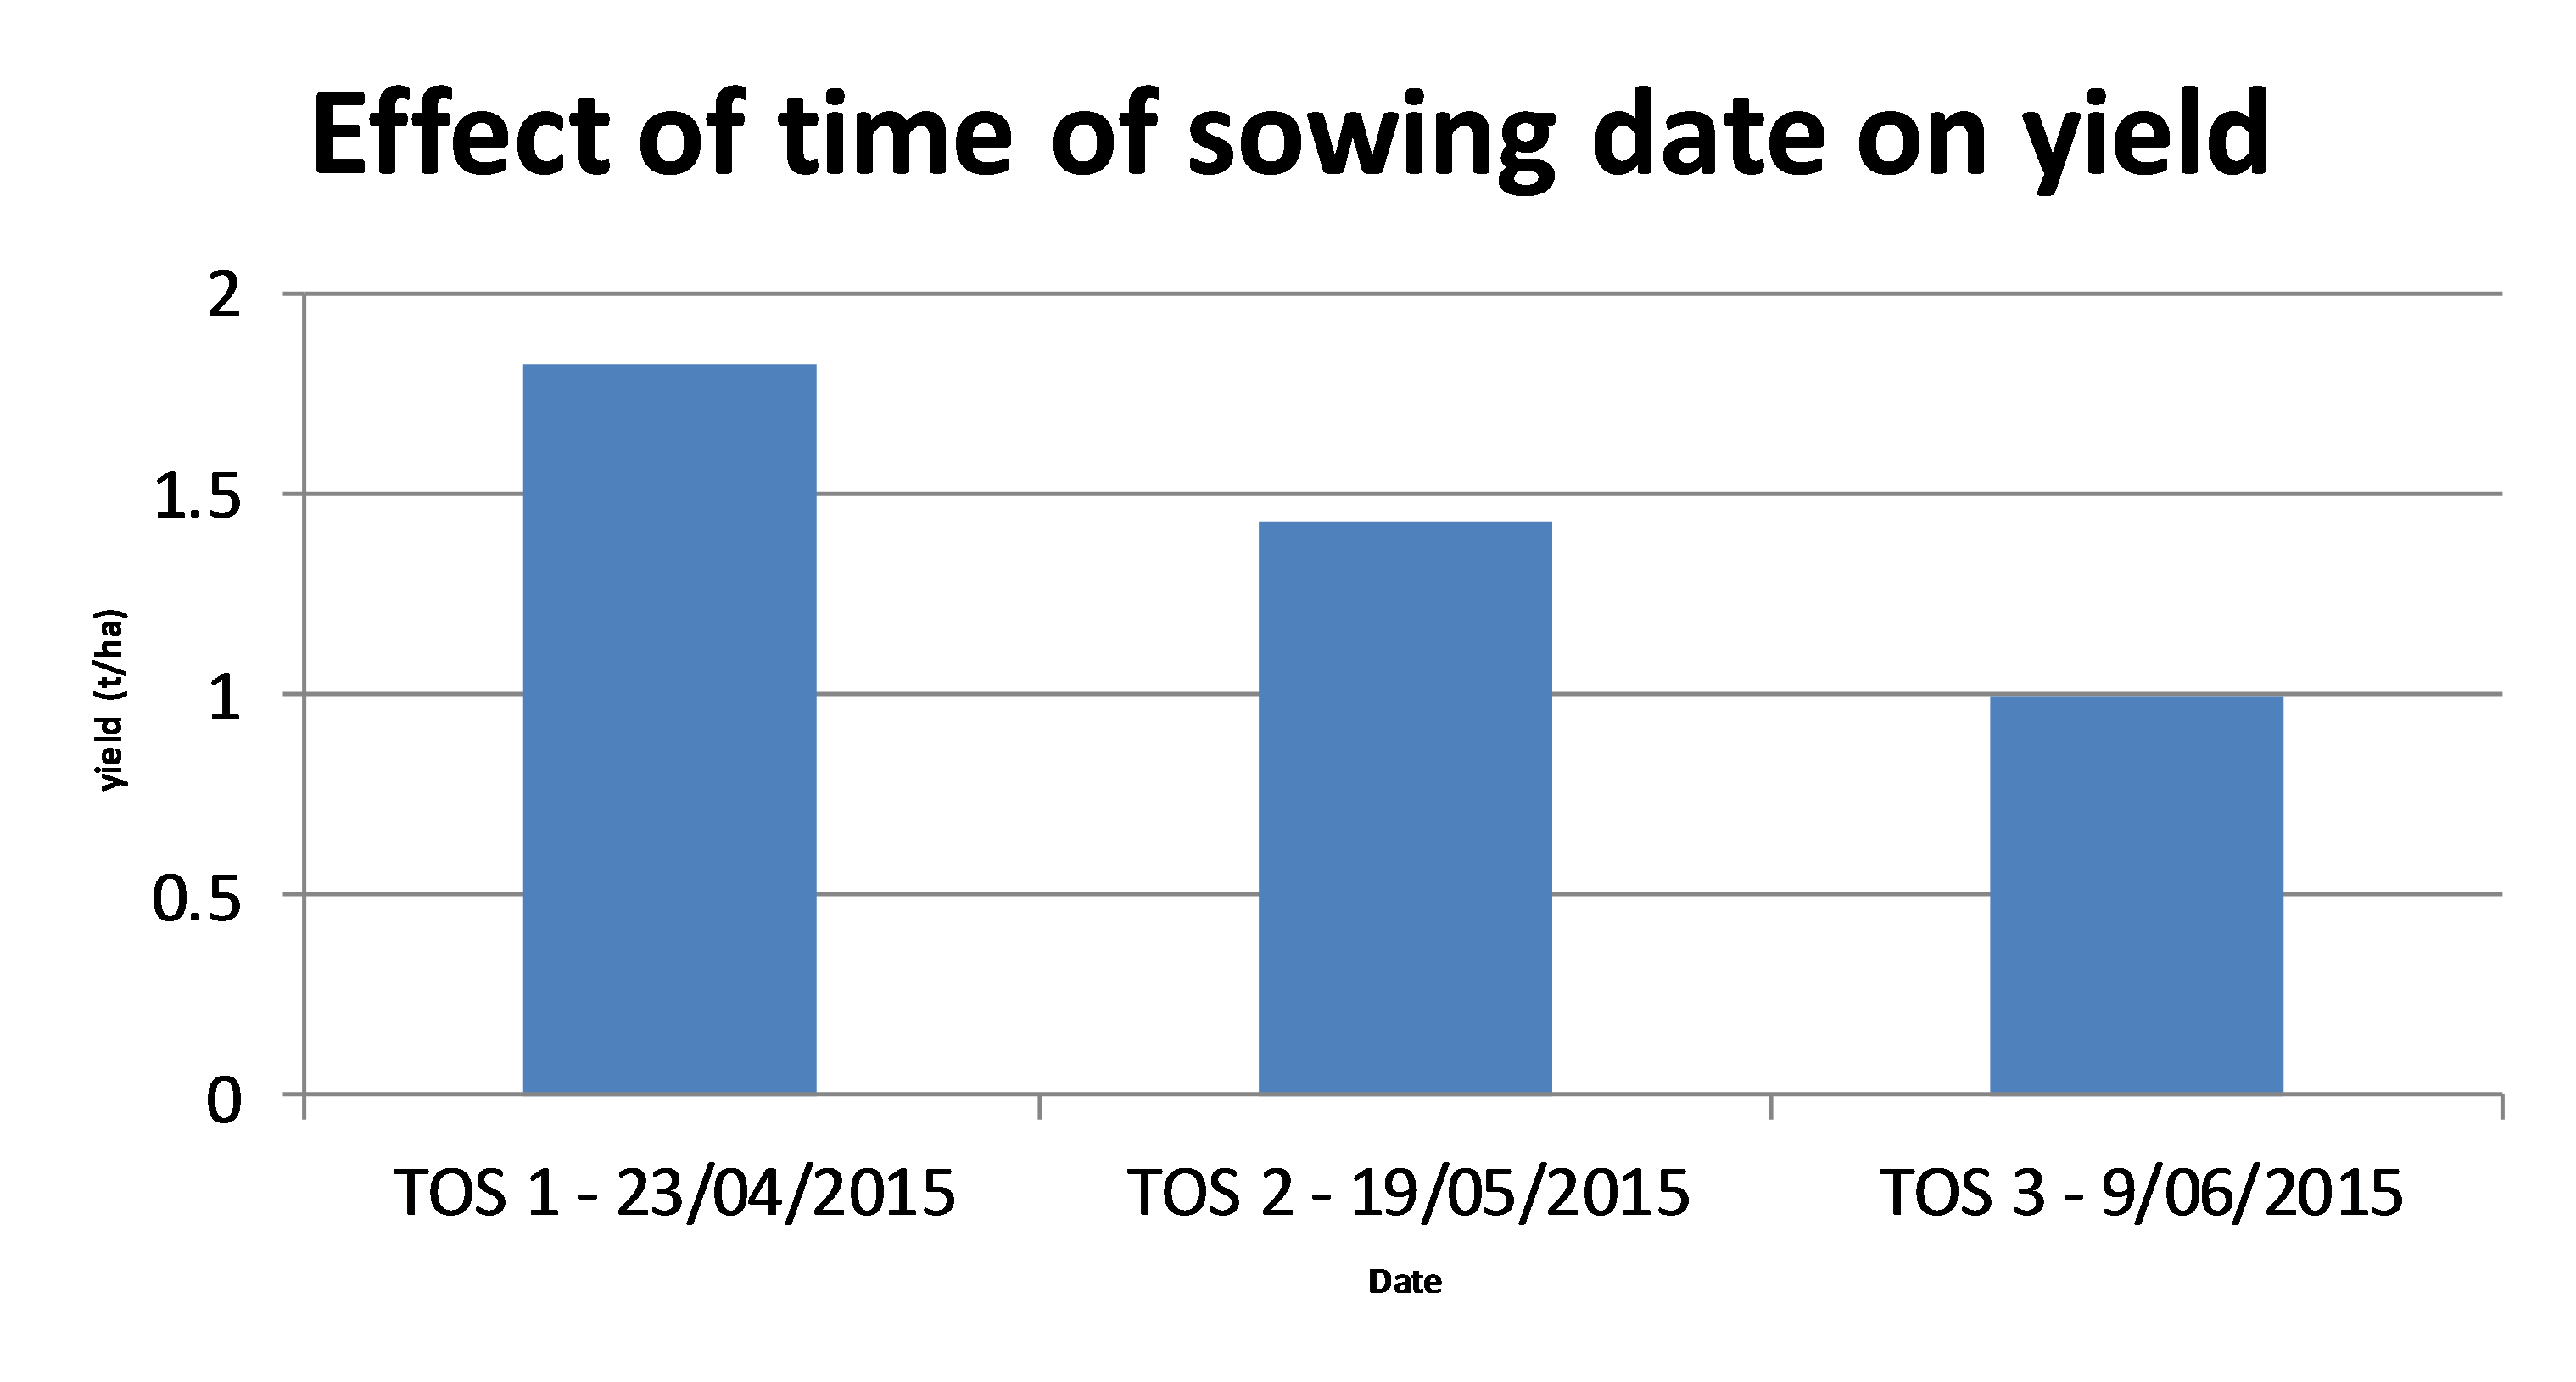 Figure 4. Effect of time of sowing date on yield, Dalby 2014